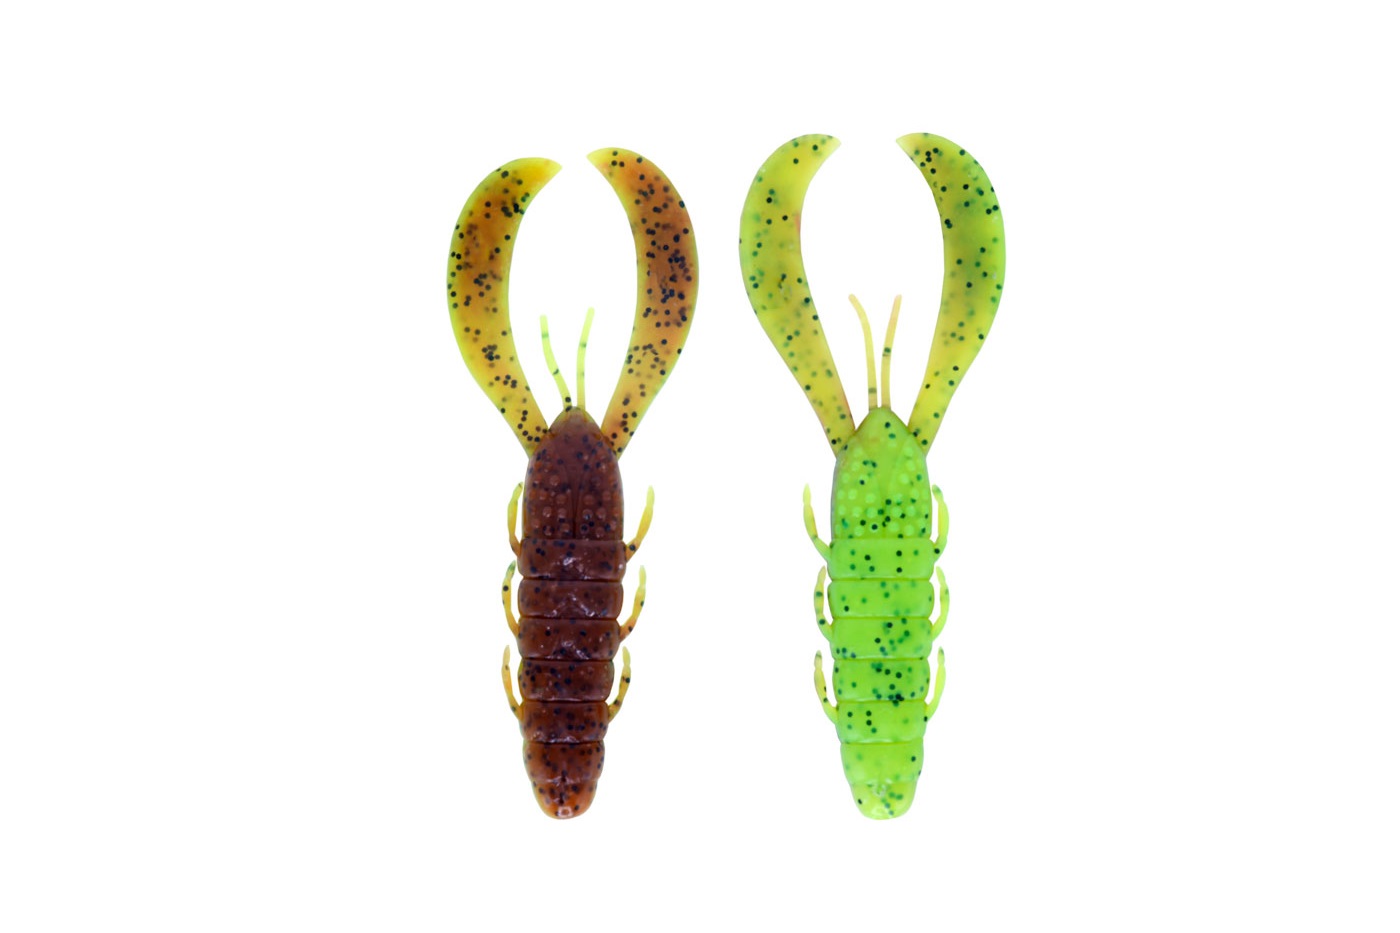 Esche-siliconiche-soft-baits-gamberi-flapping-craw-herakles-leftail-bug-green-pumpkin-chartreuse-lure-fishing-planet.